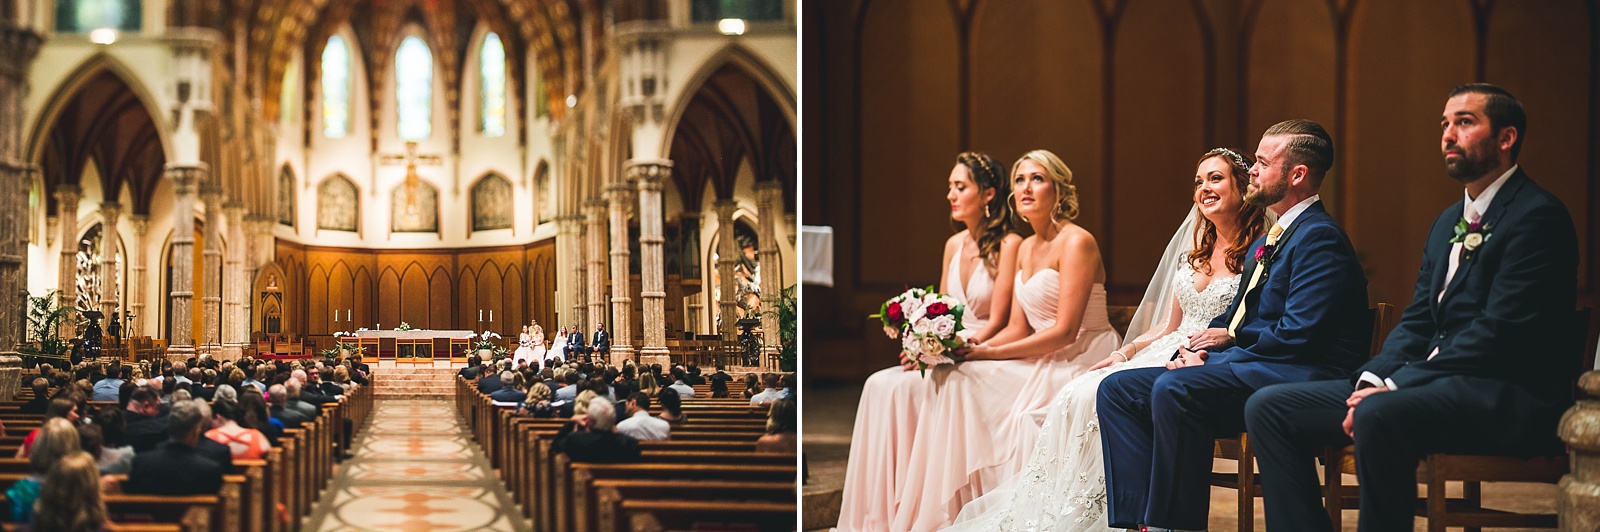 30 getting married at holy name cathedral peter gubernat - Hilton Chicago Wedding Photographer // Sarah + Aaron